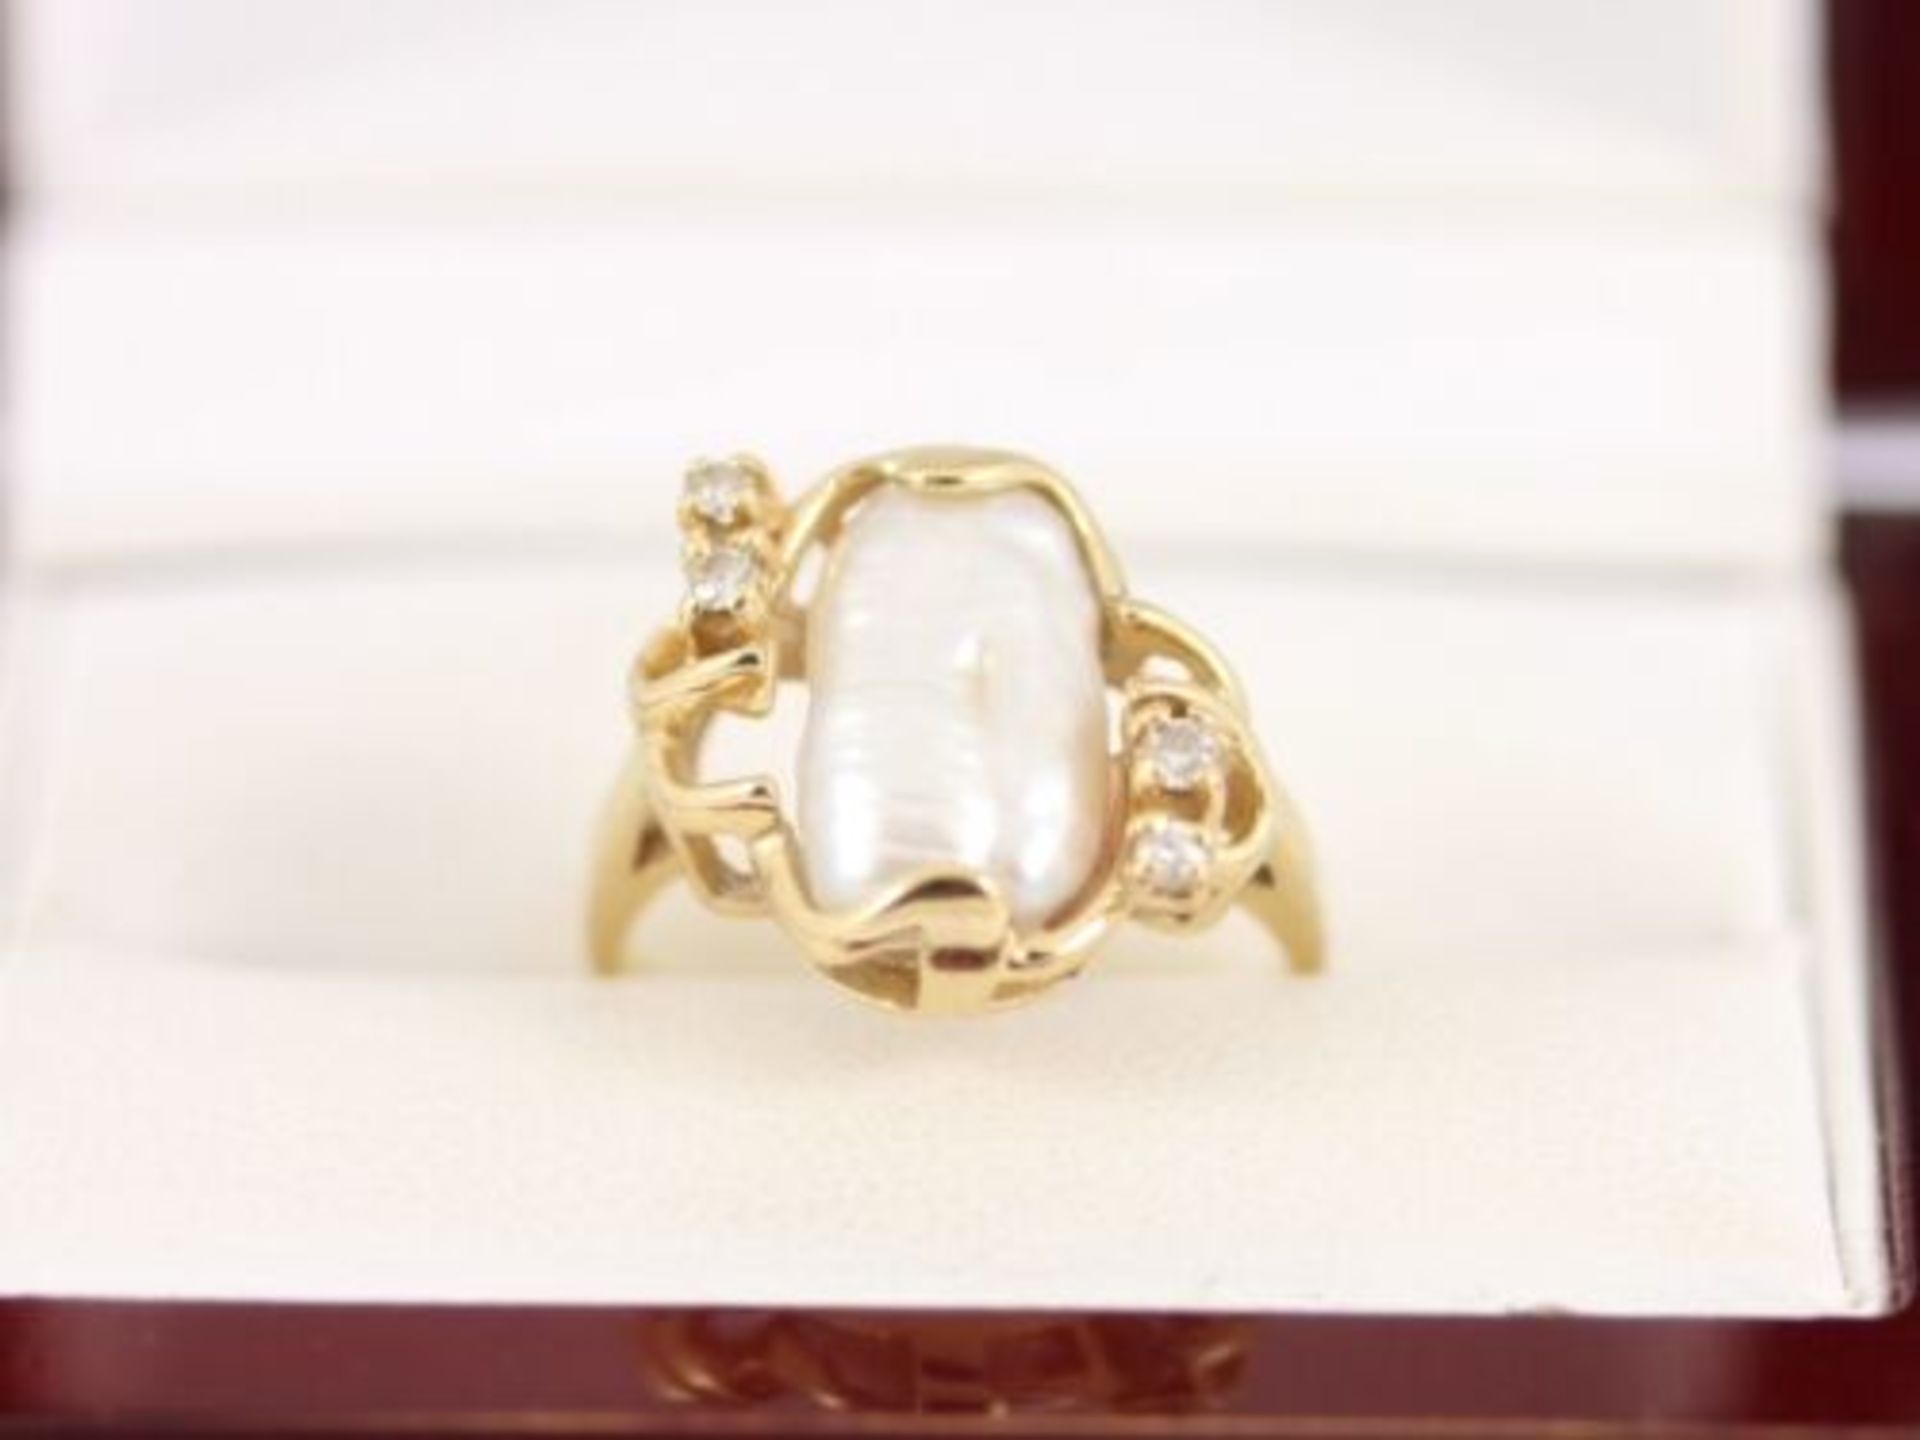 DIAMOND AND BAROQUE PEARL RING 14K GOLD LADIES STUNNING SIZE J 585 3.3G - Image 2 of 4